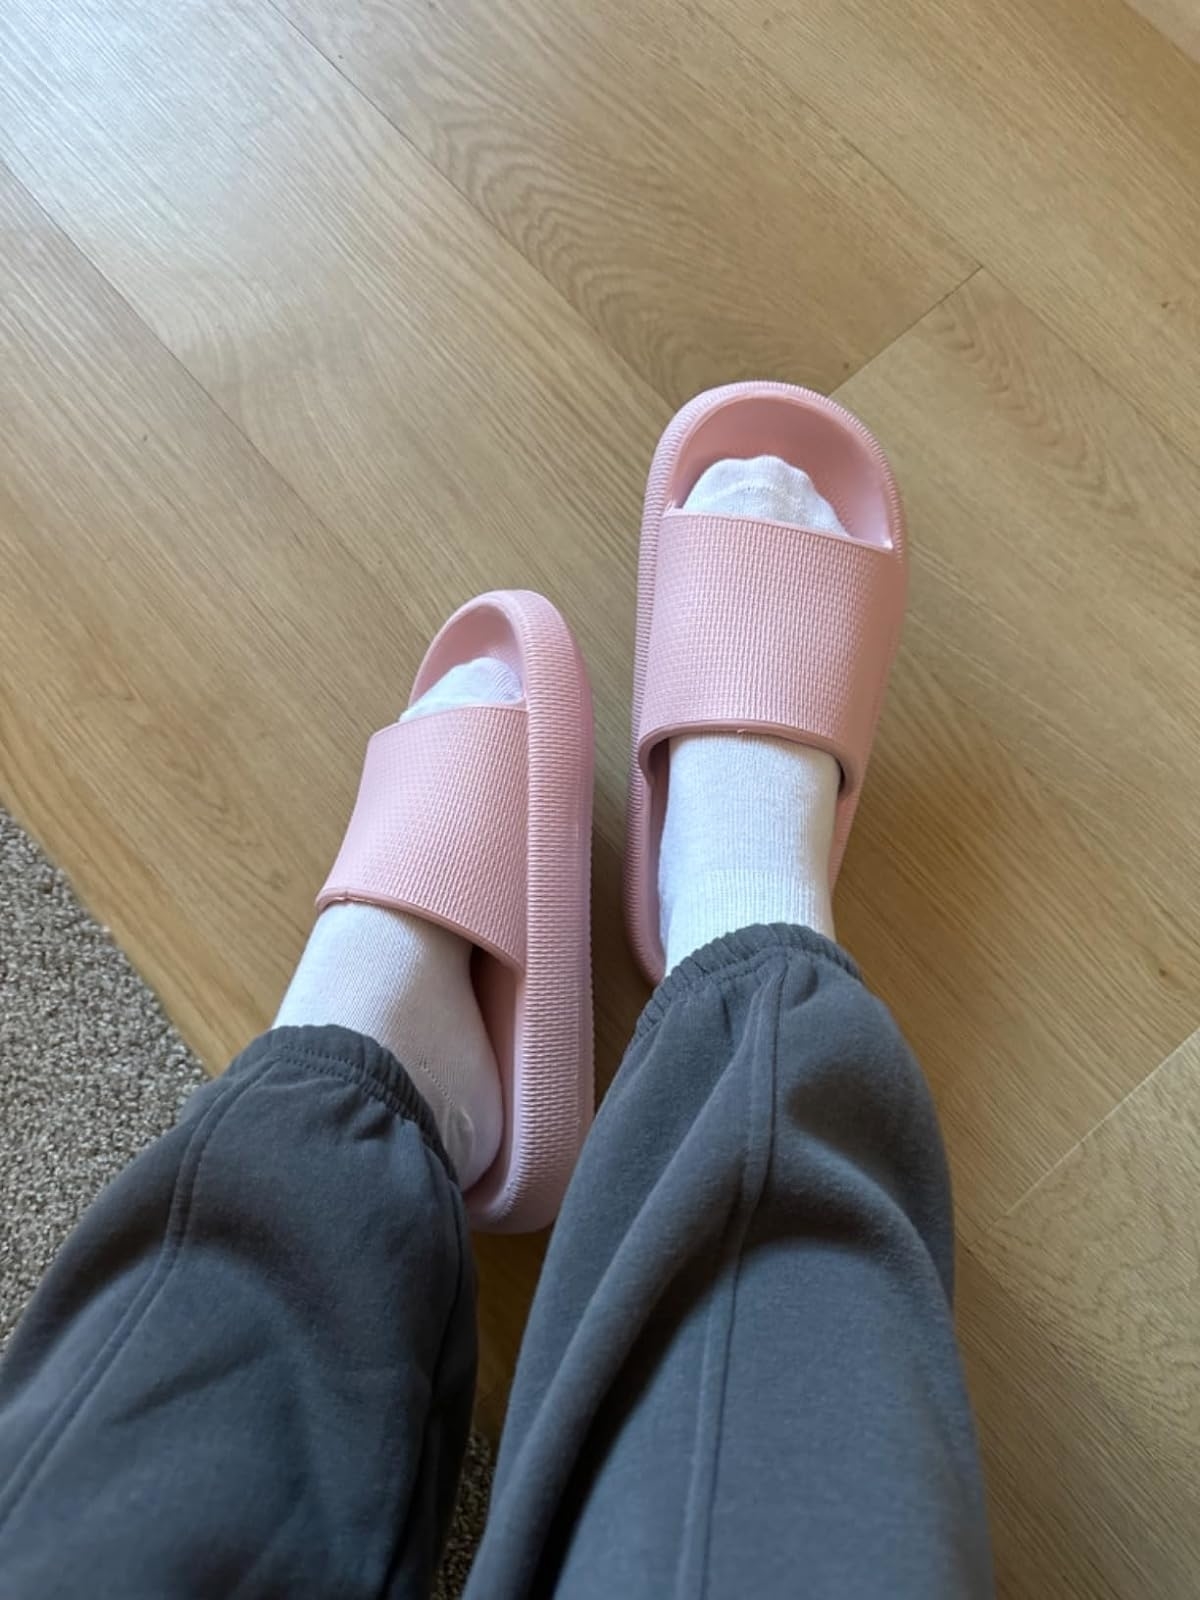 Person wearing white socks with pink slide sandals and grey sweatpants, highlighting comfortable indoor wear